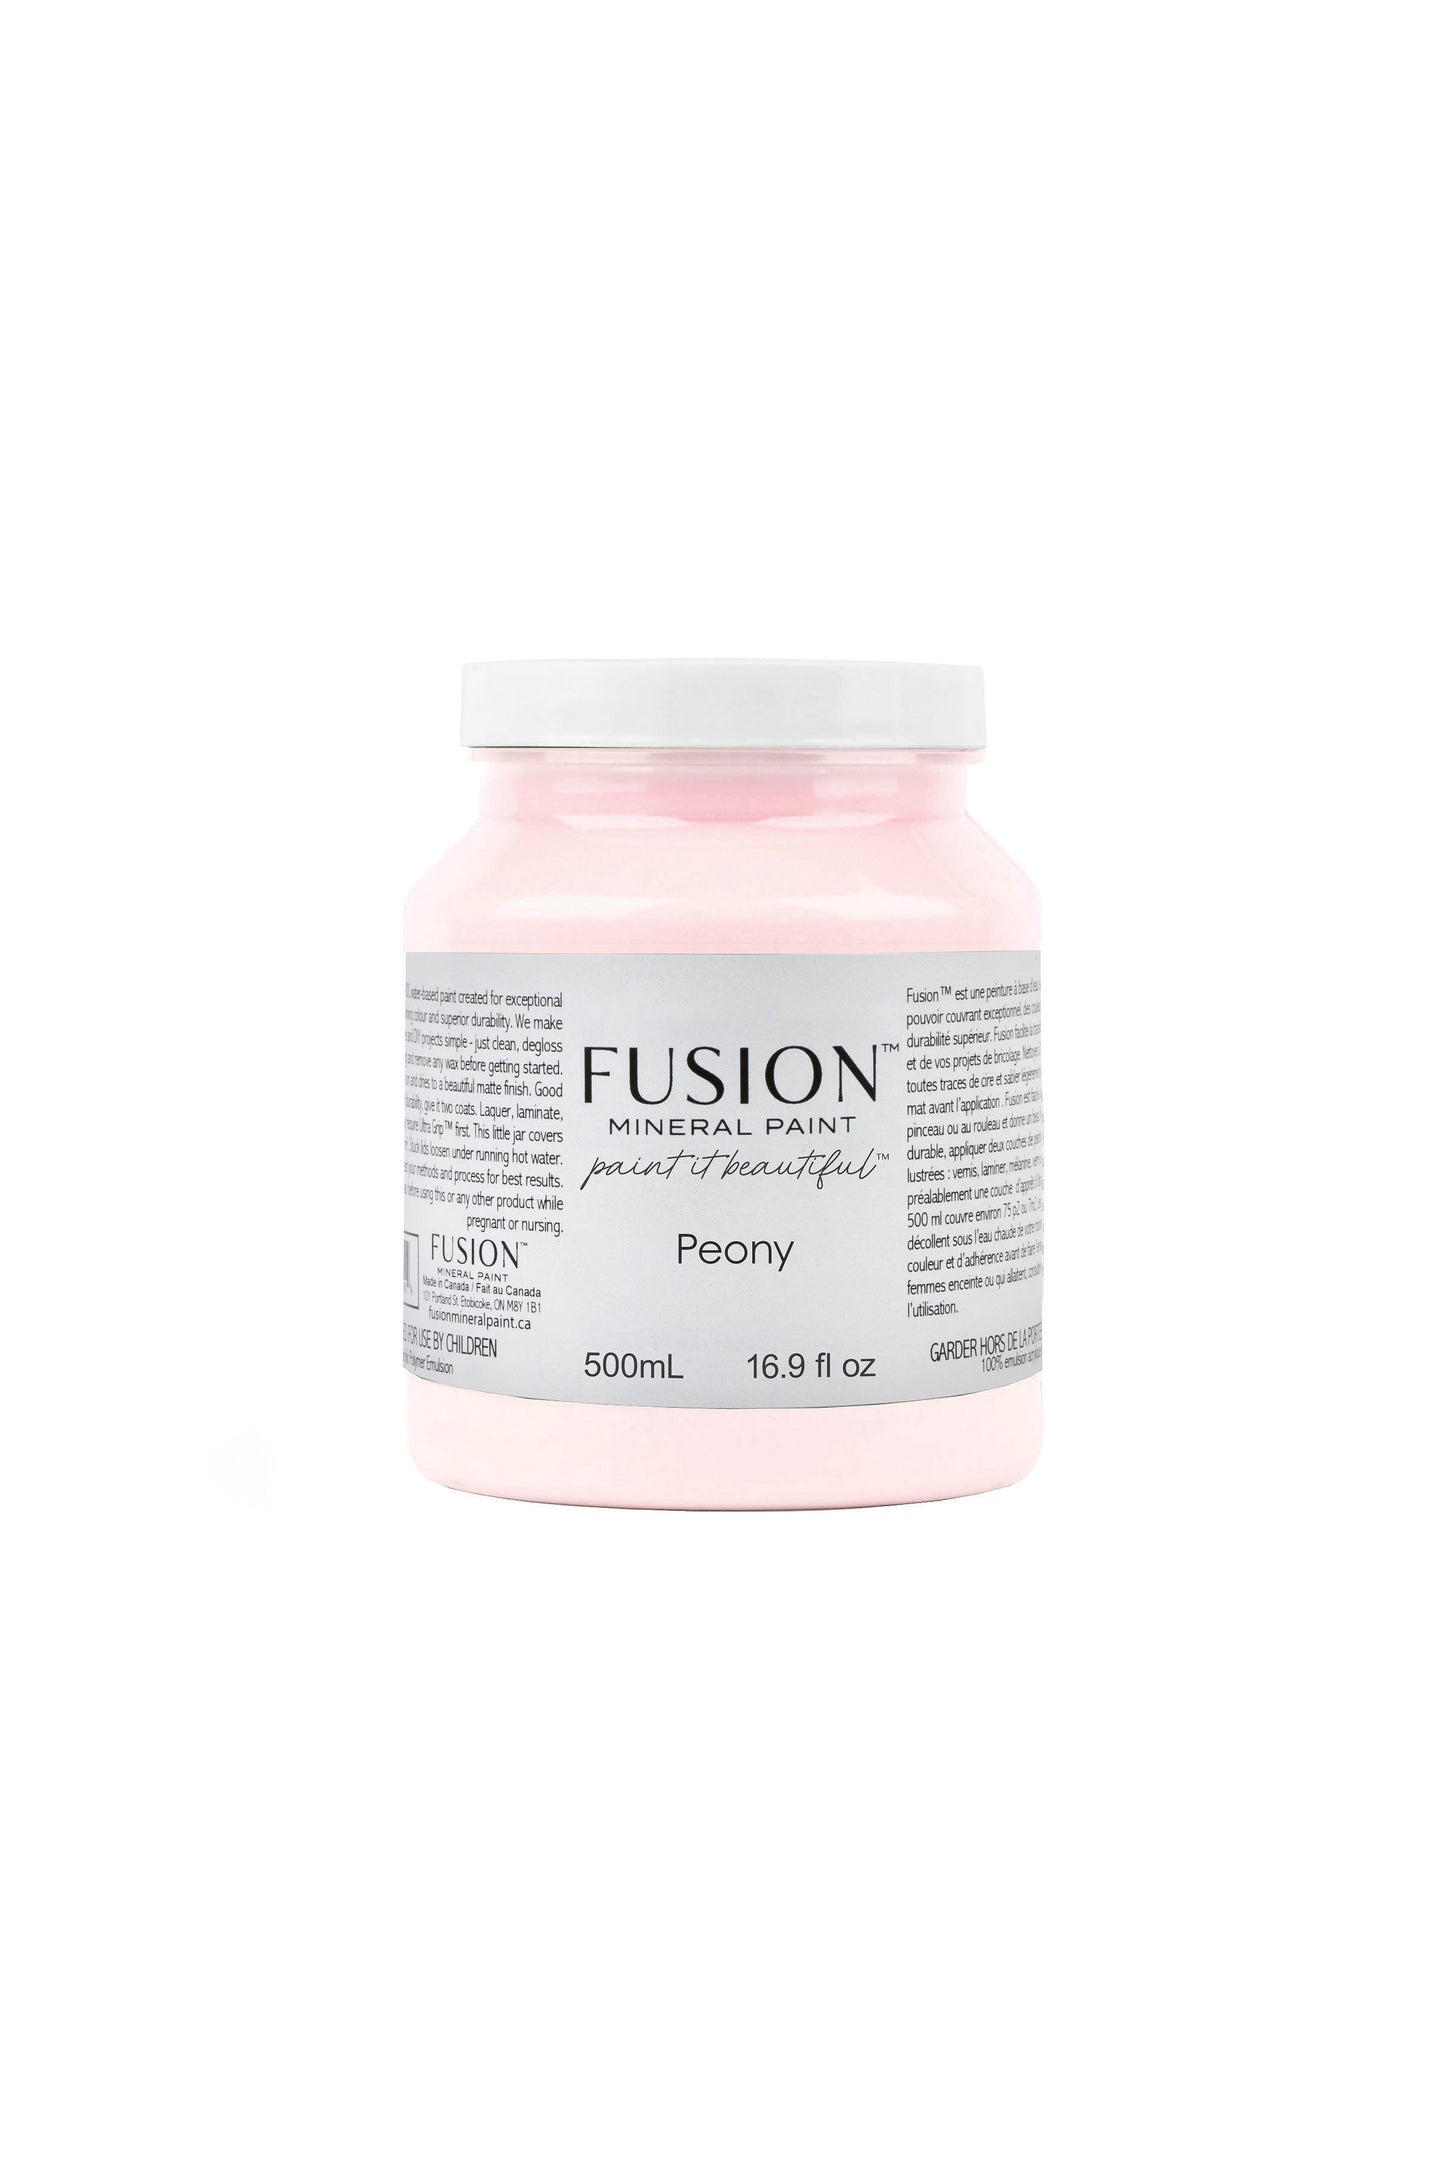 FUSION MINERAL PAINT- Peony